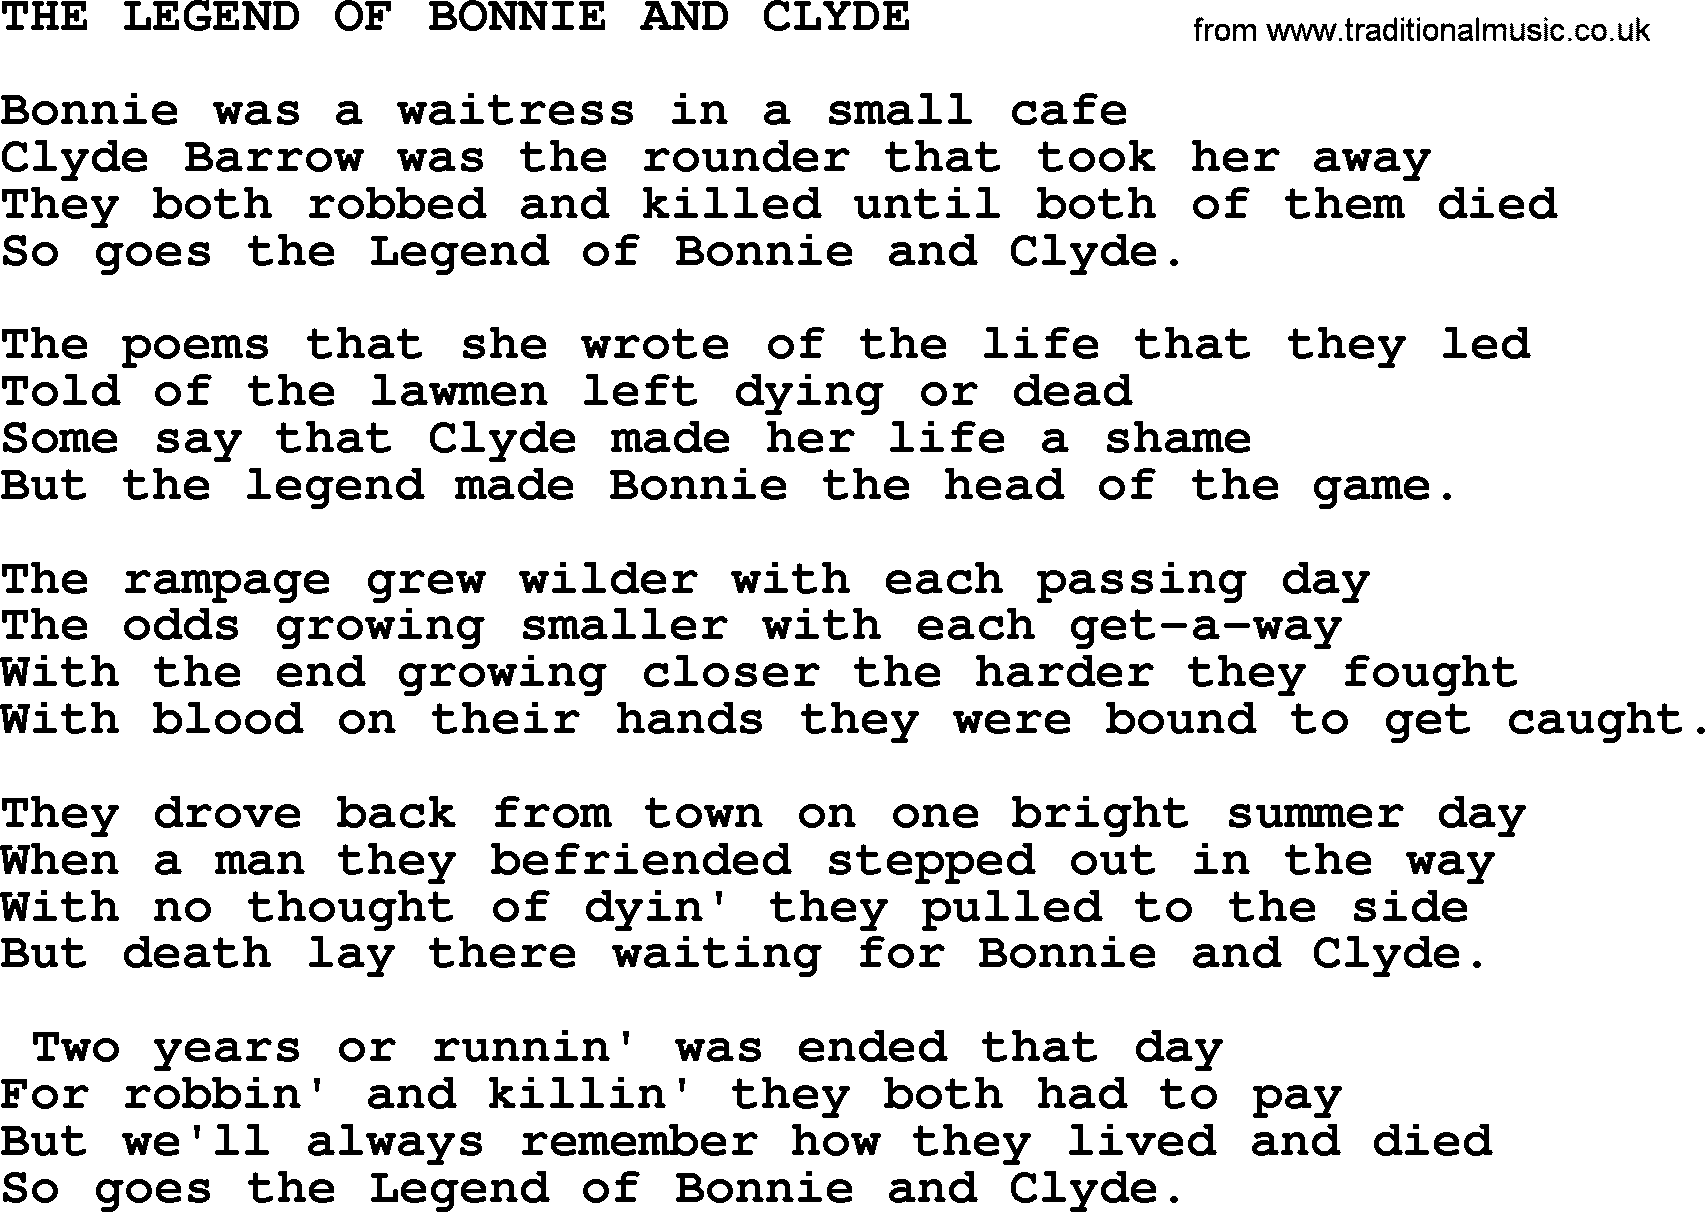 Merle Haggard song: The Legend Of Bonnie And Clyde, lyrics.